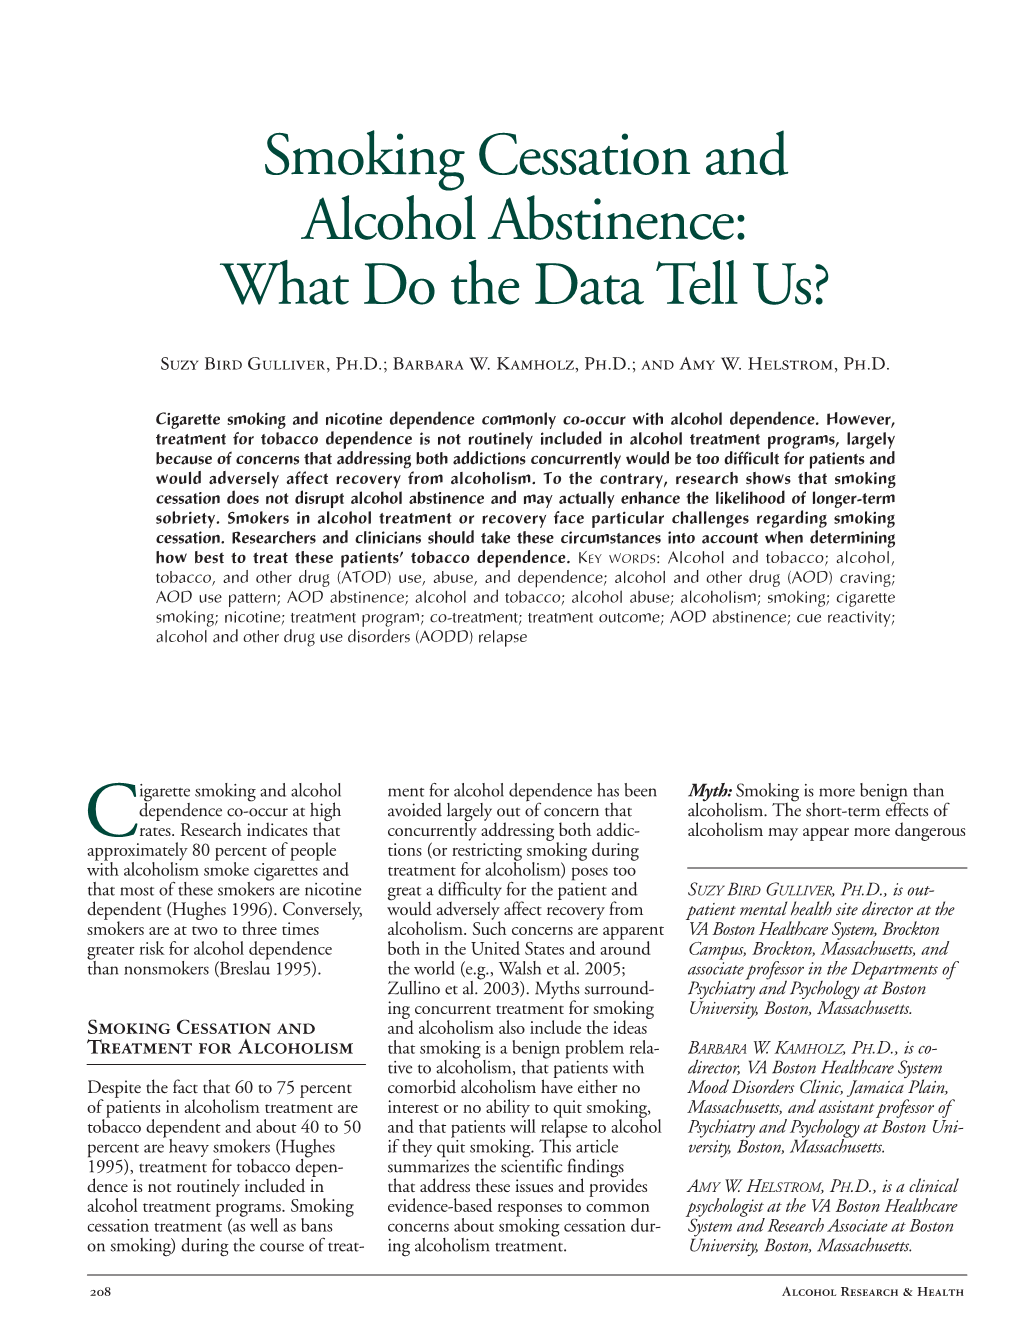 Smoking Cessation and Alcohol Abstinence: What Do the Data Tell Us?